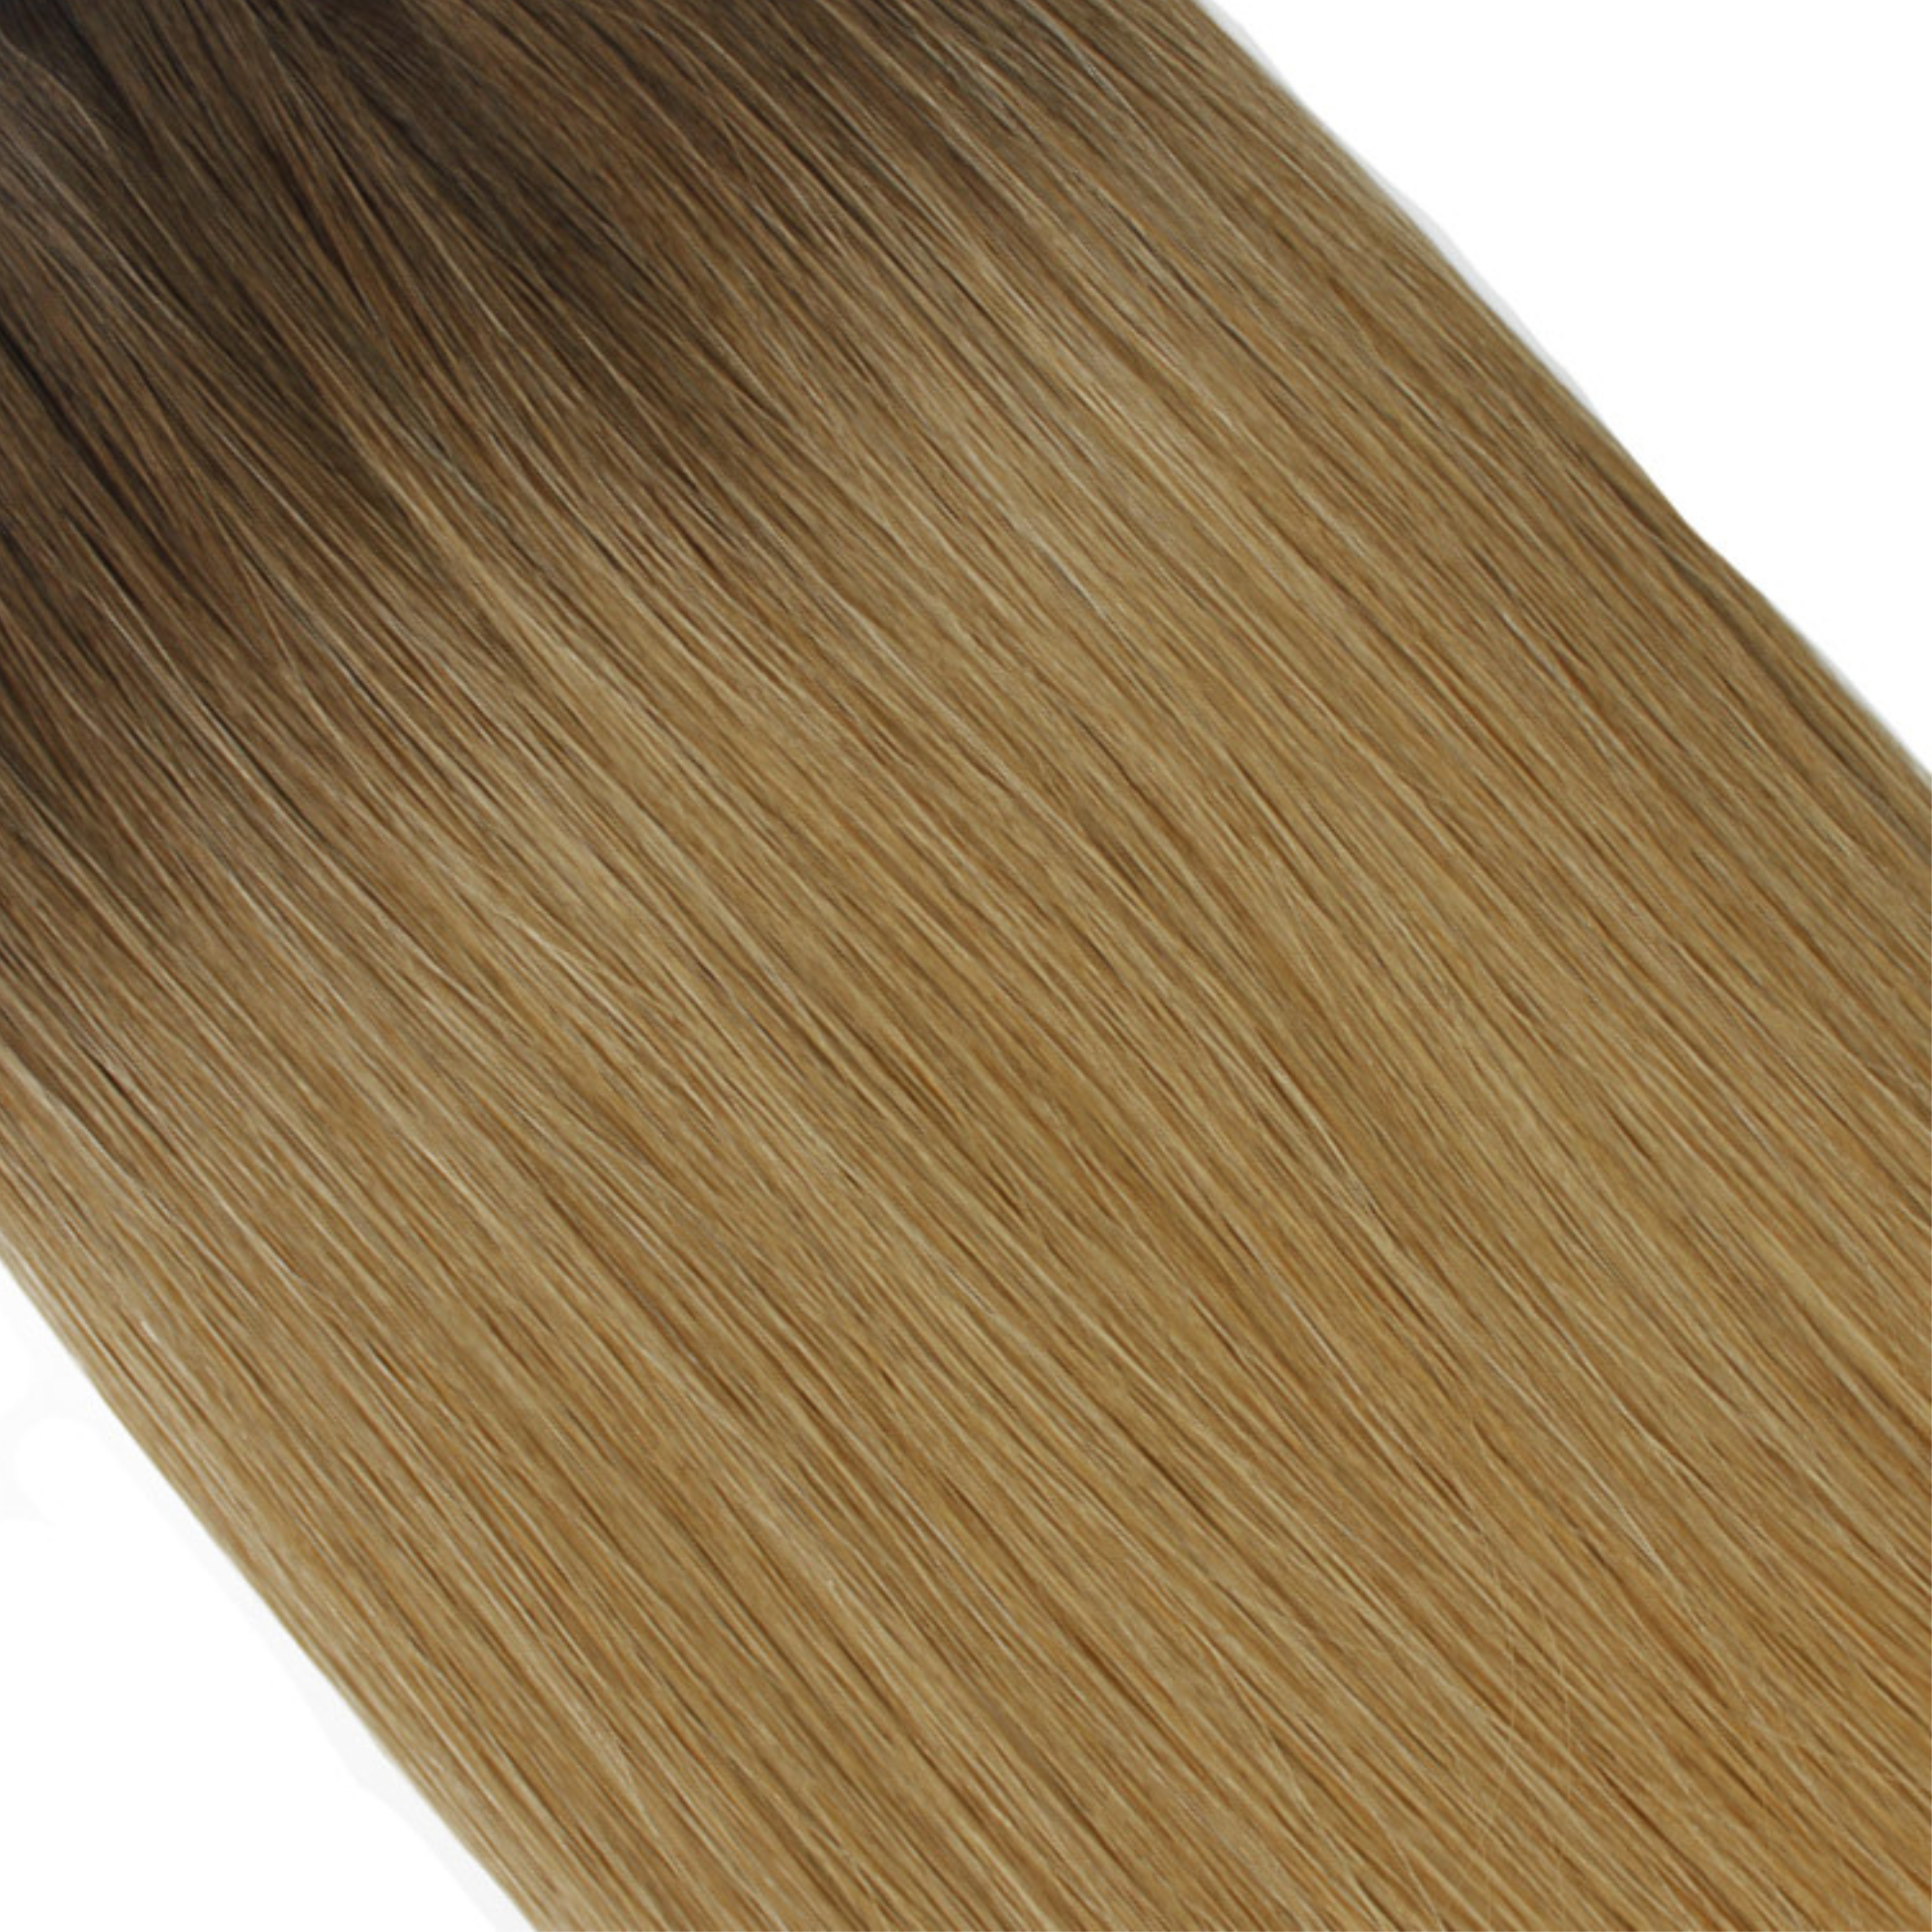 "hair rehab london 14" tape hair extensions shade swatch titled rooted boho"